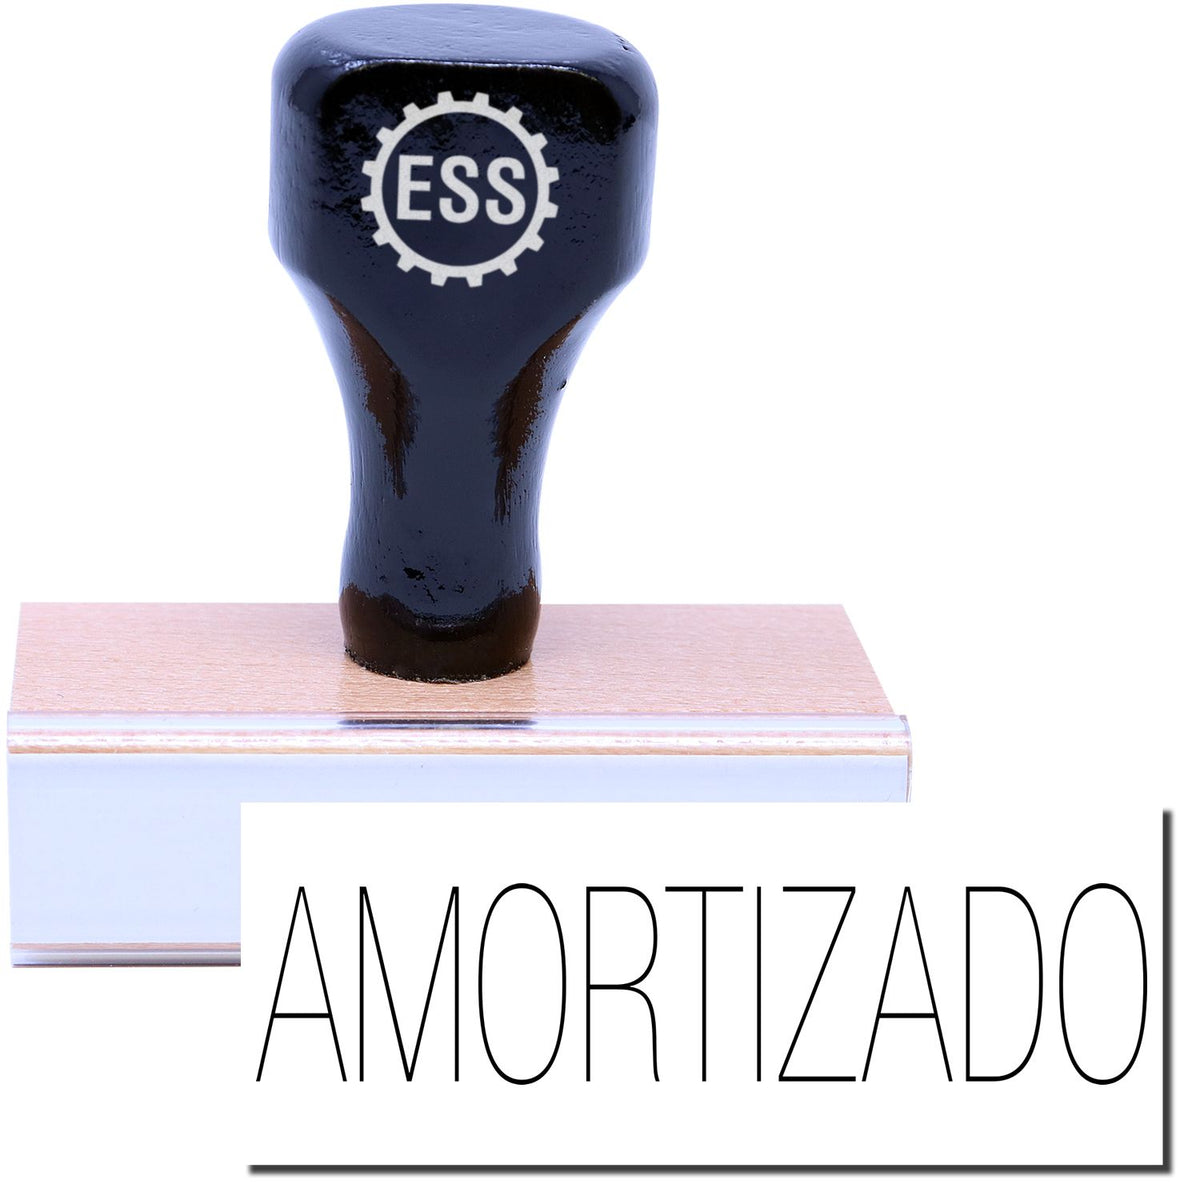 A stock office rubber stamp with a stamped image showing how the text &quot;AMORTIZADO&quot; in a large font is displayed after stamping.